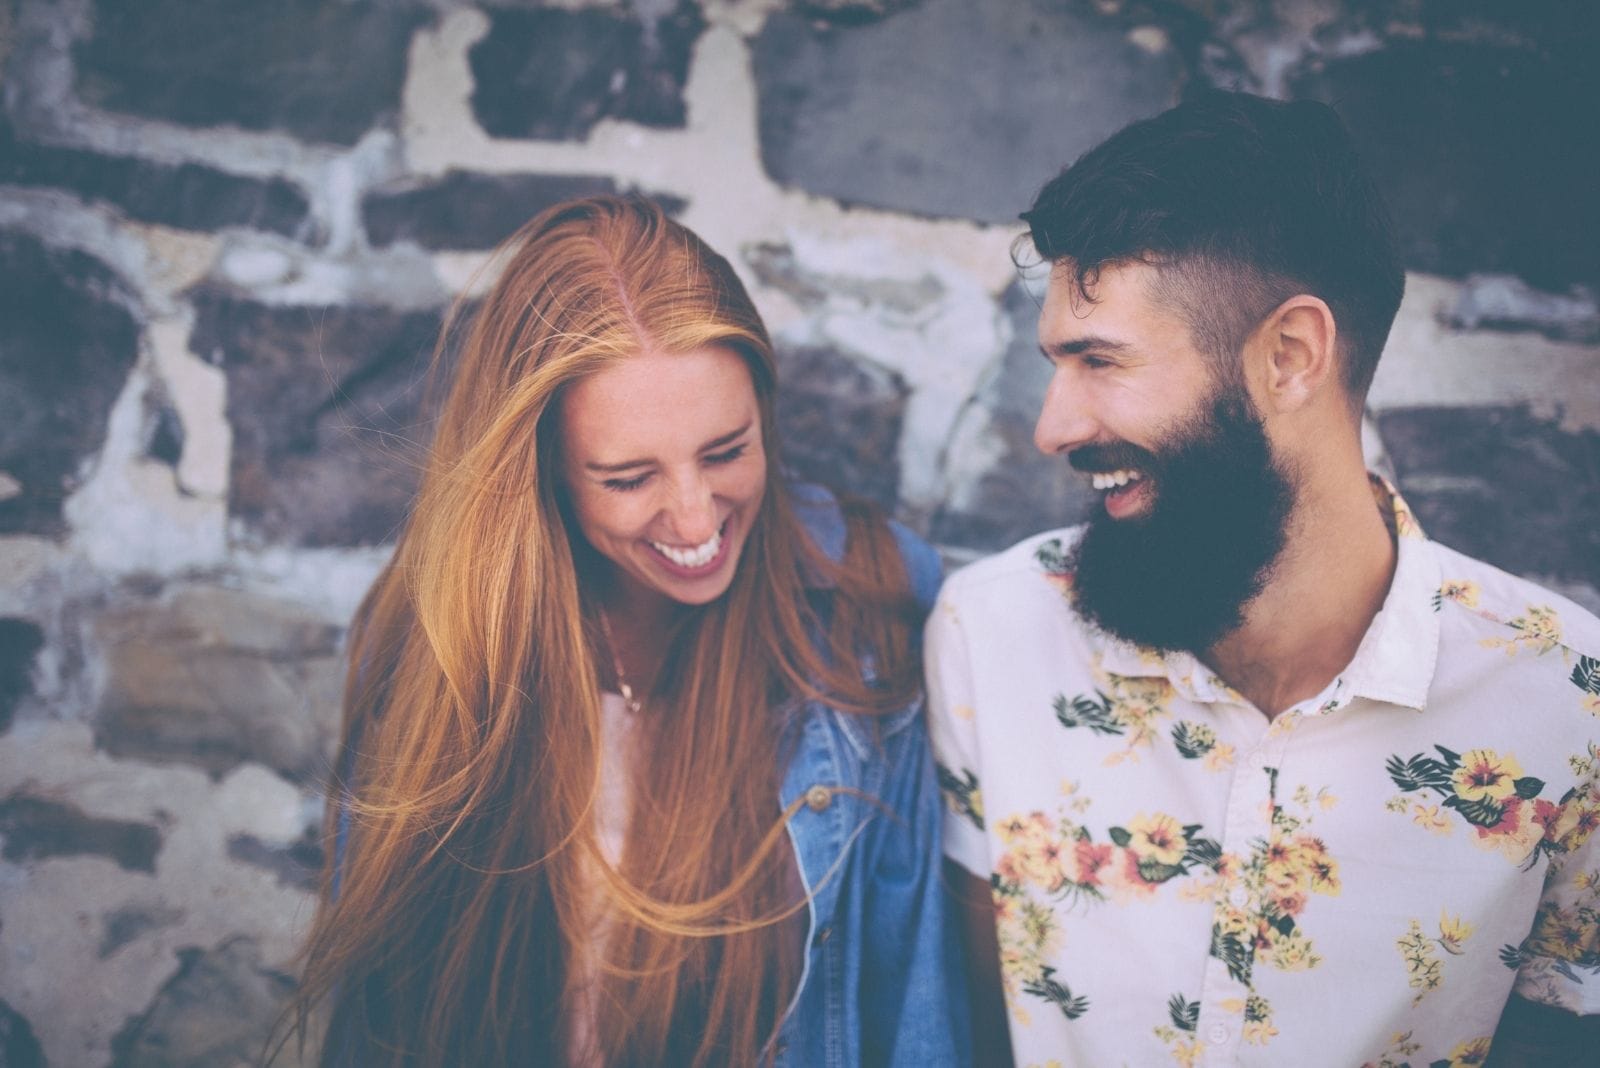 Why Platonic Intimacy Is The Purest Form Of Love